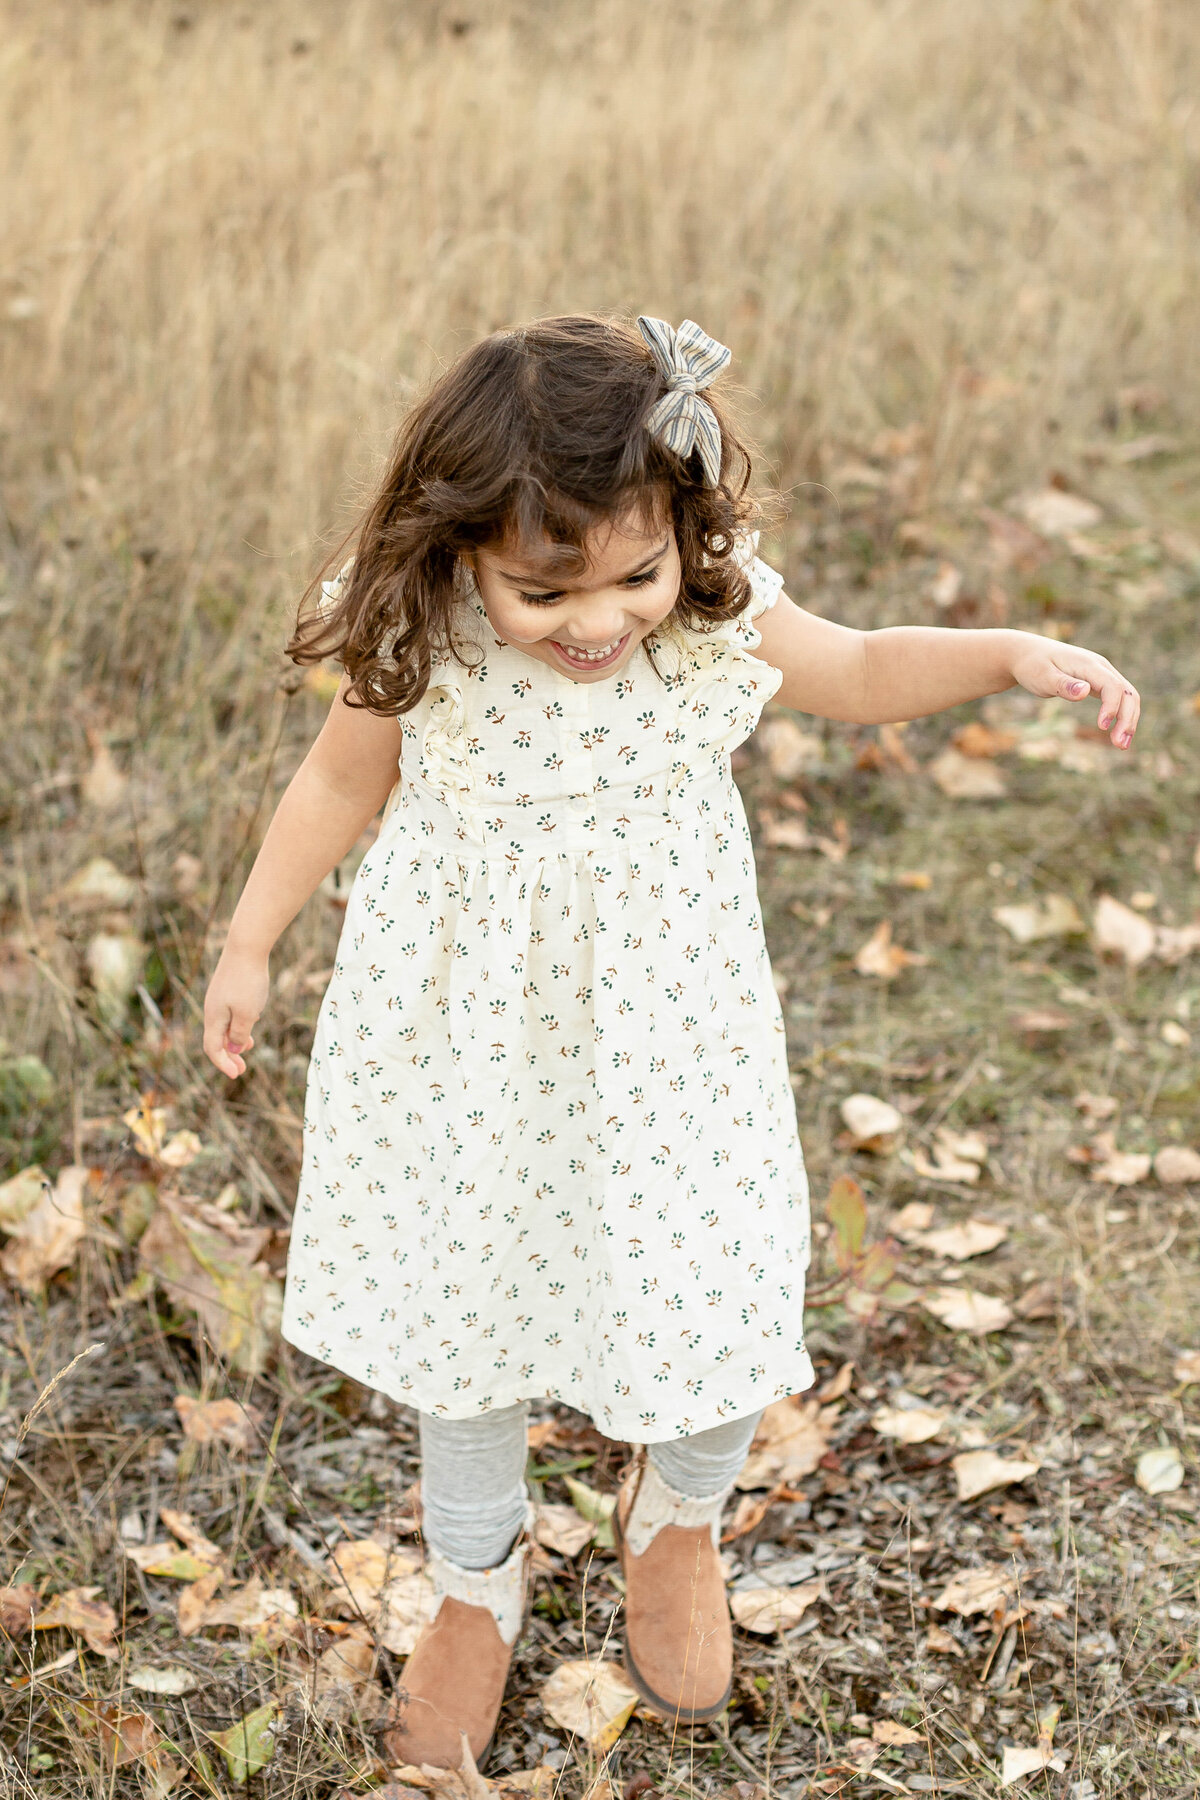 Toddler girl with cream dress on standing in a field and smiling looking down at the ground during fall family photography session.